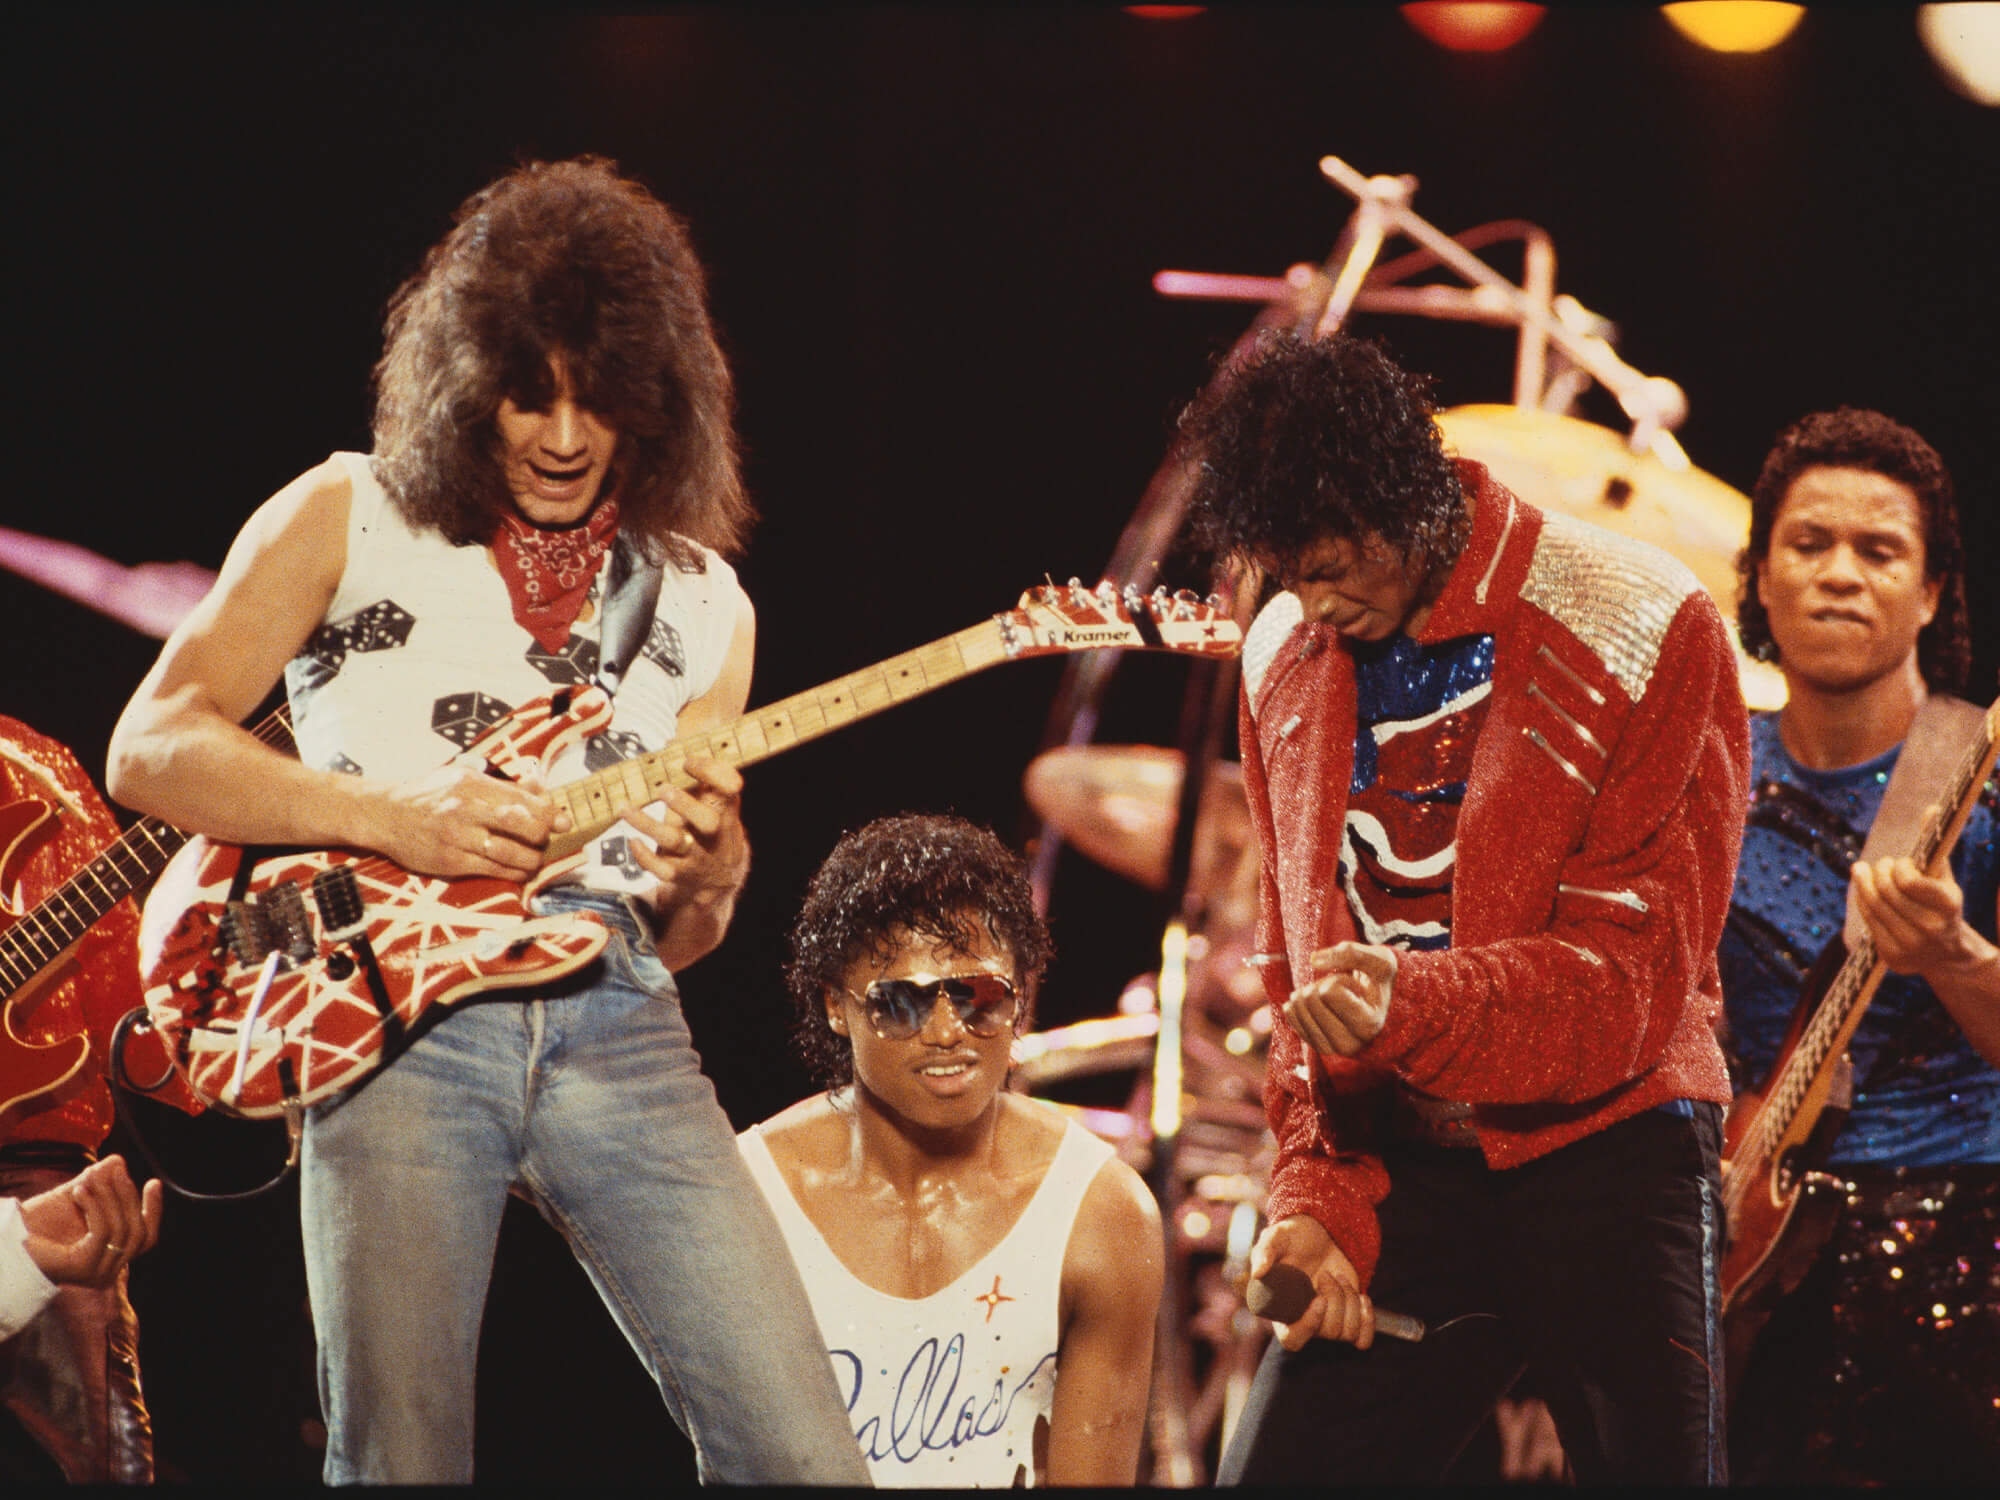 Eddie Van Halen and Michael Jackson on stage together. Eddie is playing his famous frankenstrat, with Jackson doing air guitar gestures with his hands next to him.